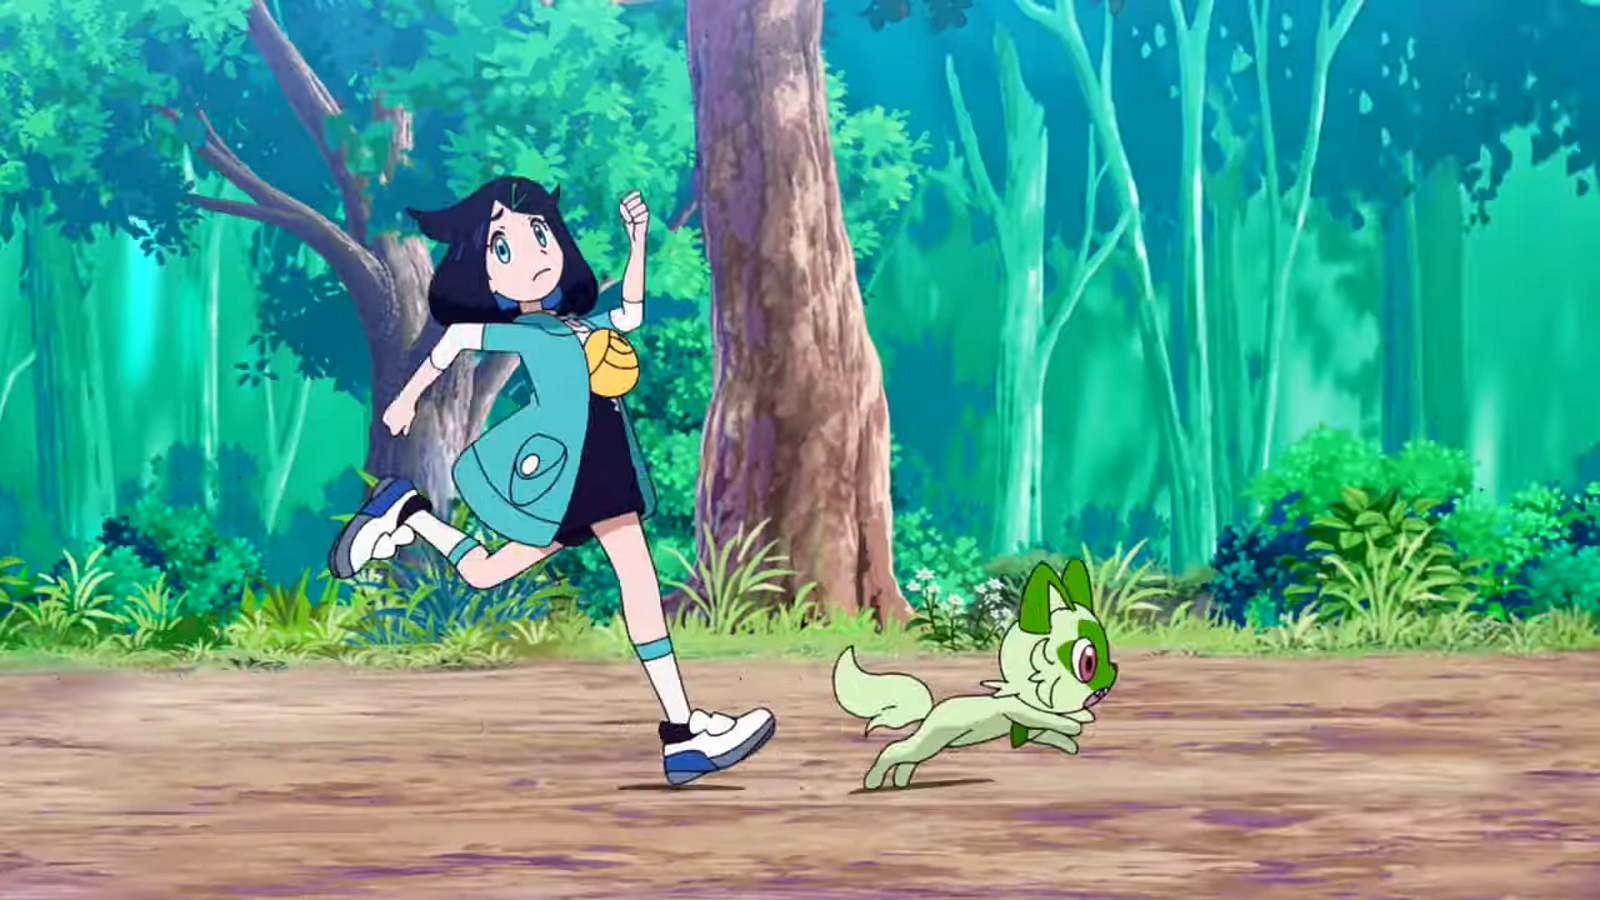 Pokémon Horizons: The Series gets a trailer to show off its new